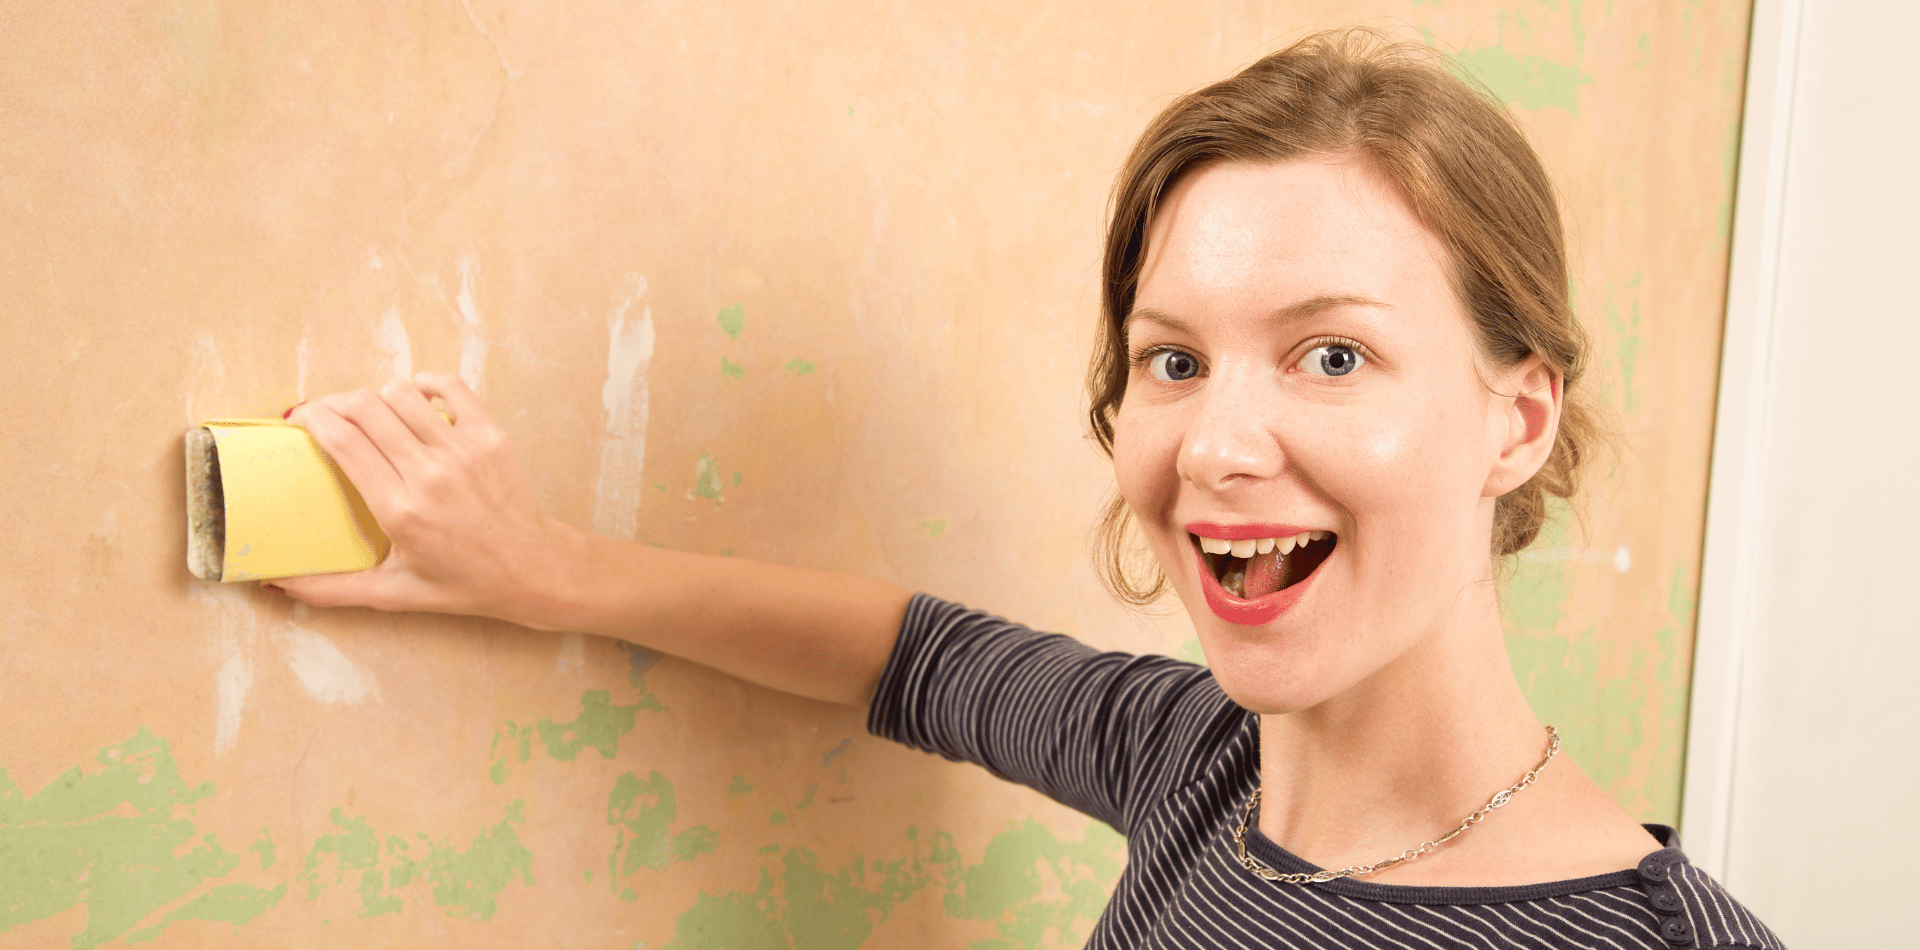 Woman preparing a wall for painting